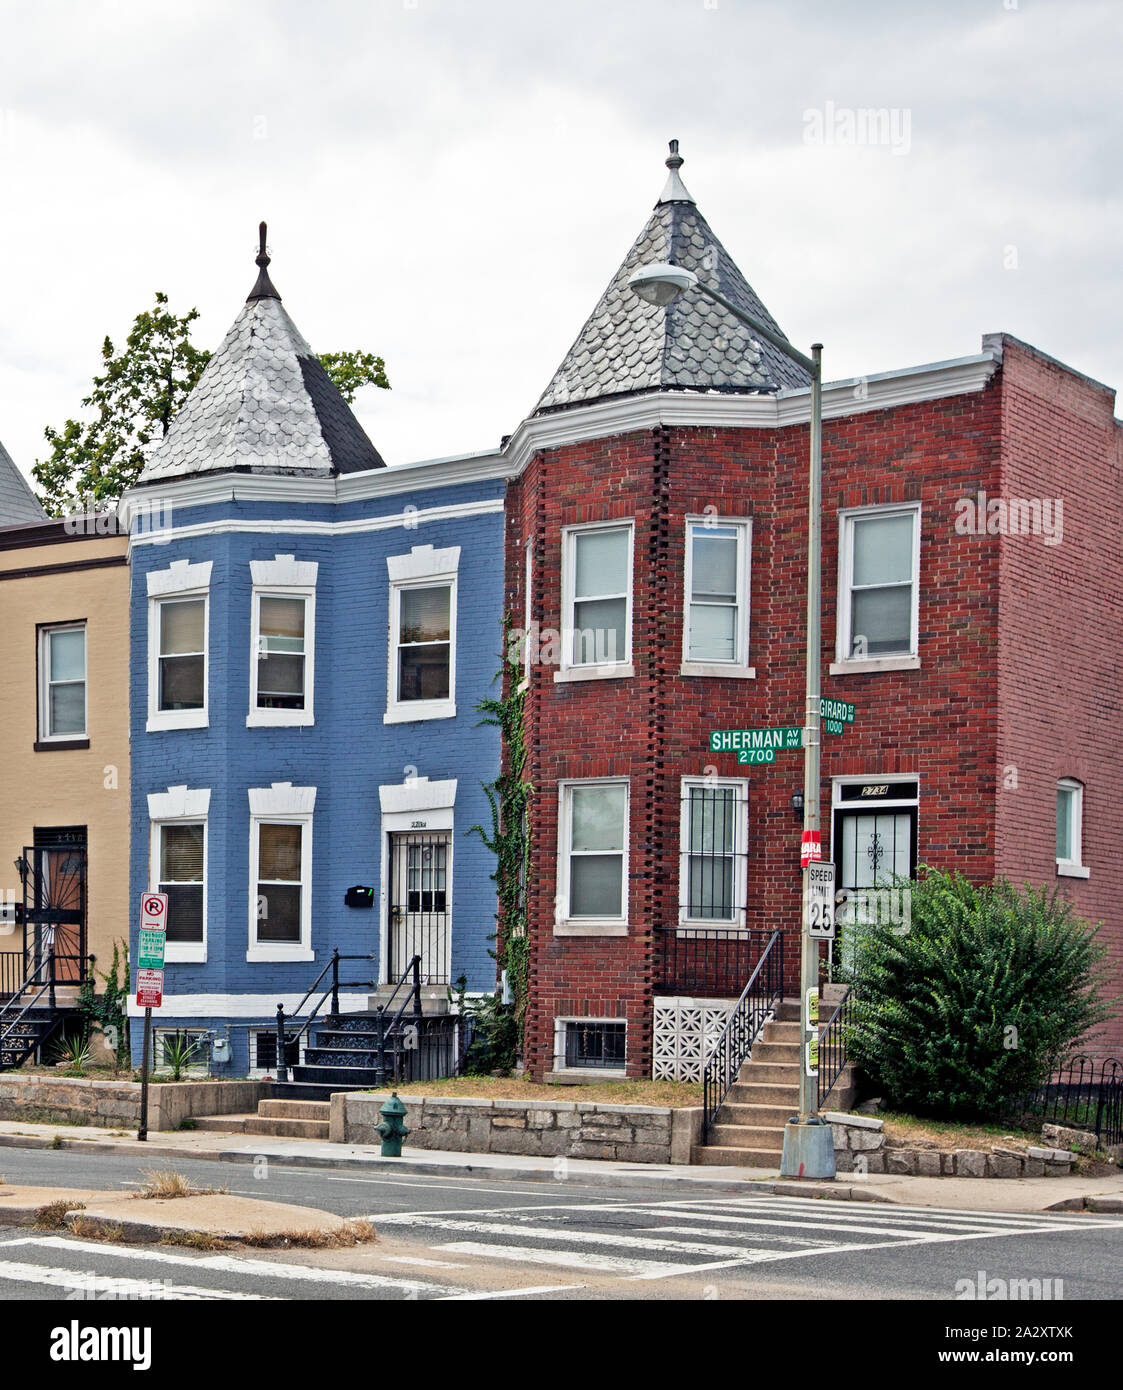 Row houses, Sherman Ave. near intersection with Girard St., NW, Washington, D.C Stock Photo